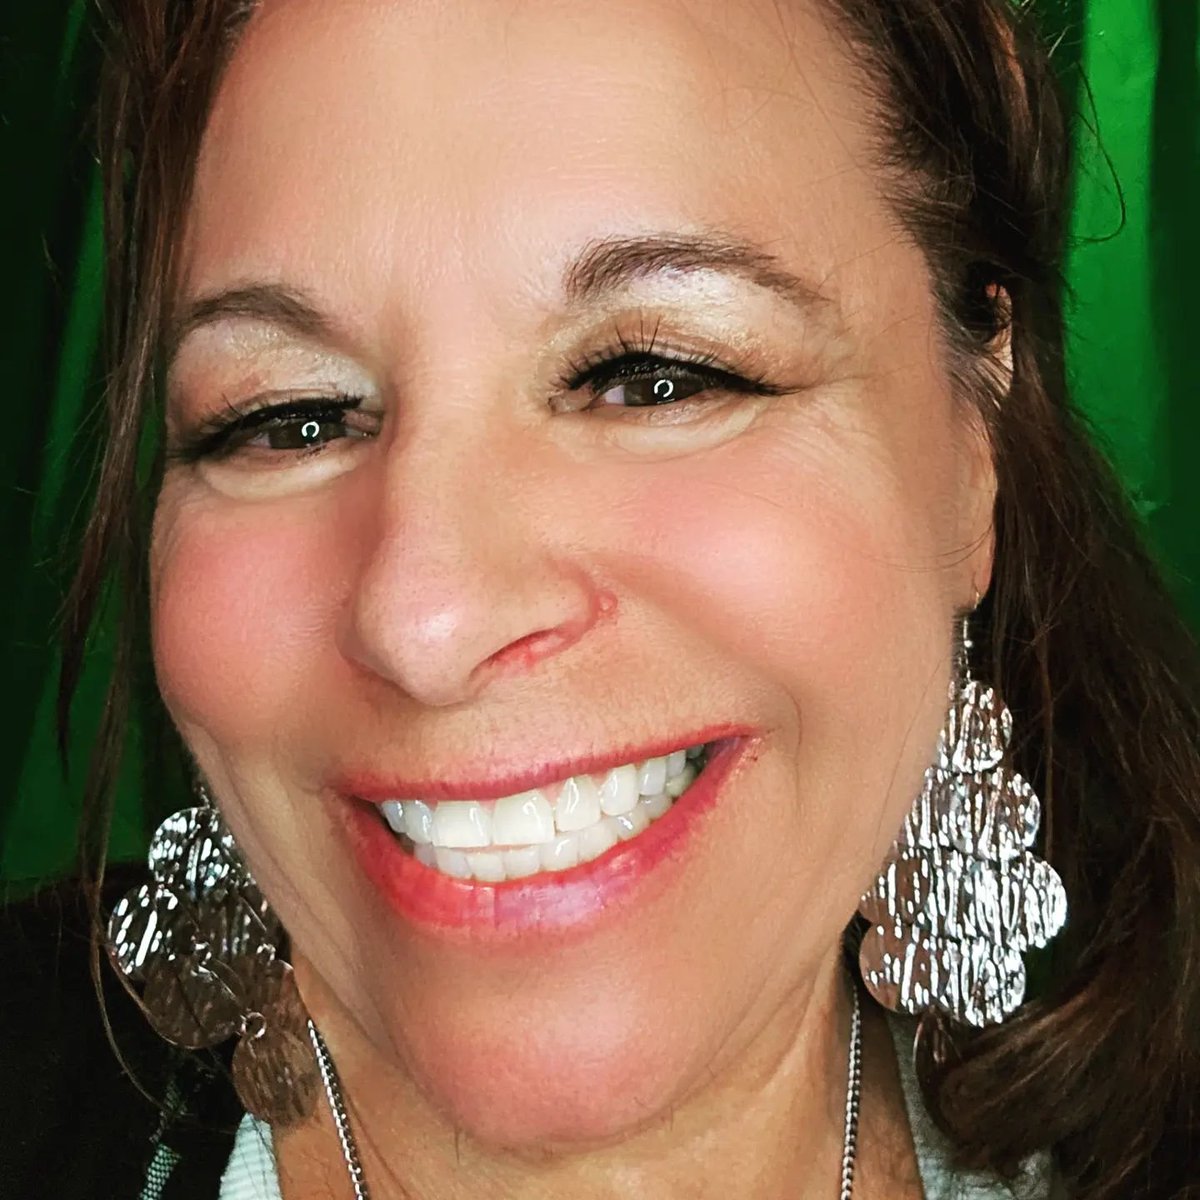 A big smile on my face because Whispering Angels is one of my favorite songs...self produced @bigfussbaby #musicartist #originalmusicians #musiciansdaily #indiemusician  #composer  #artist #masterpieces #misskristin #whisperingangels #oneworld #rendezvous instagram.com/p/Cv1FjuuLqD3/